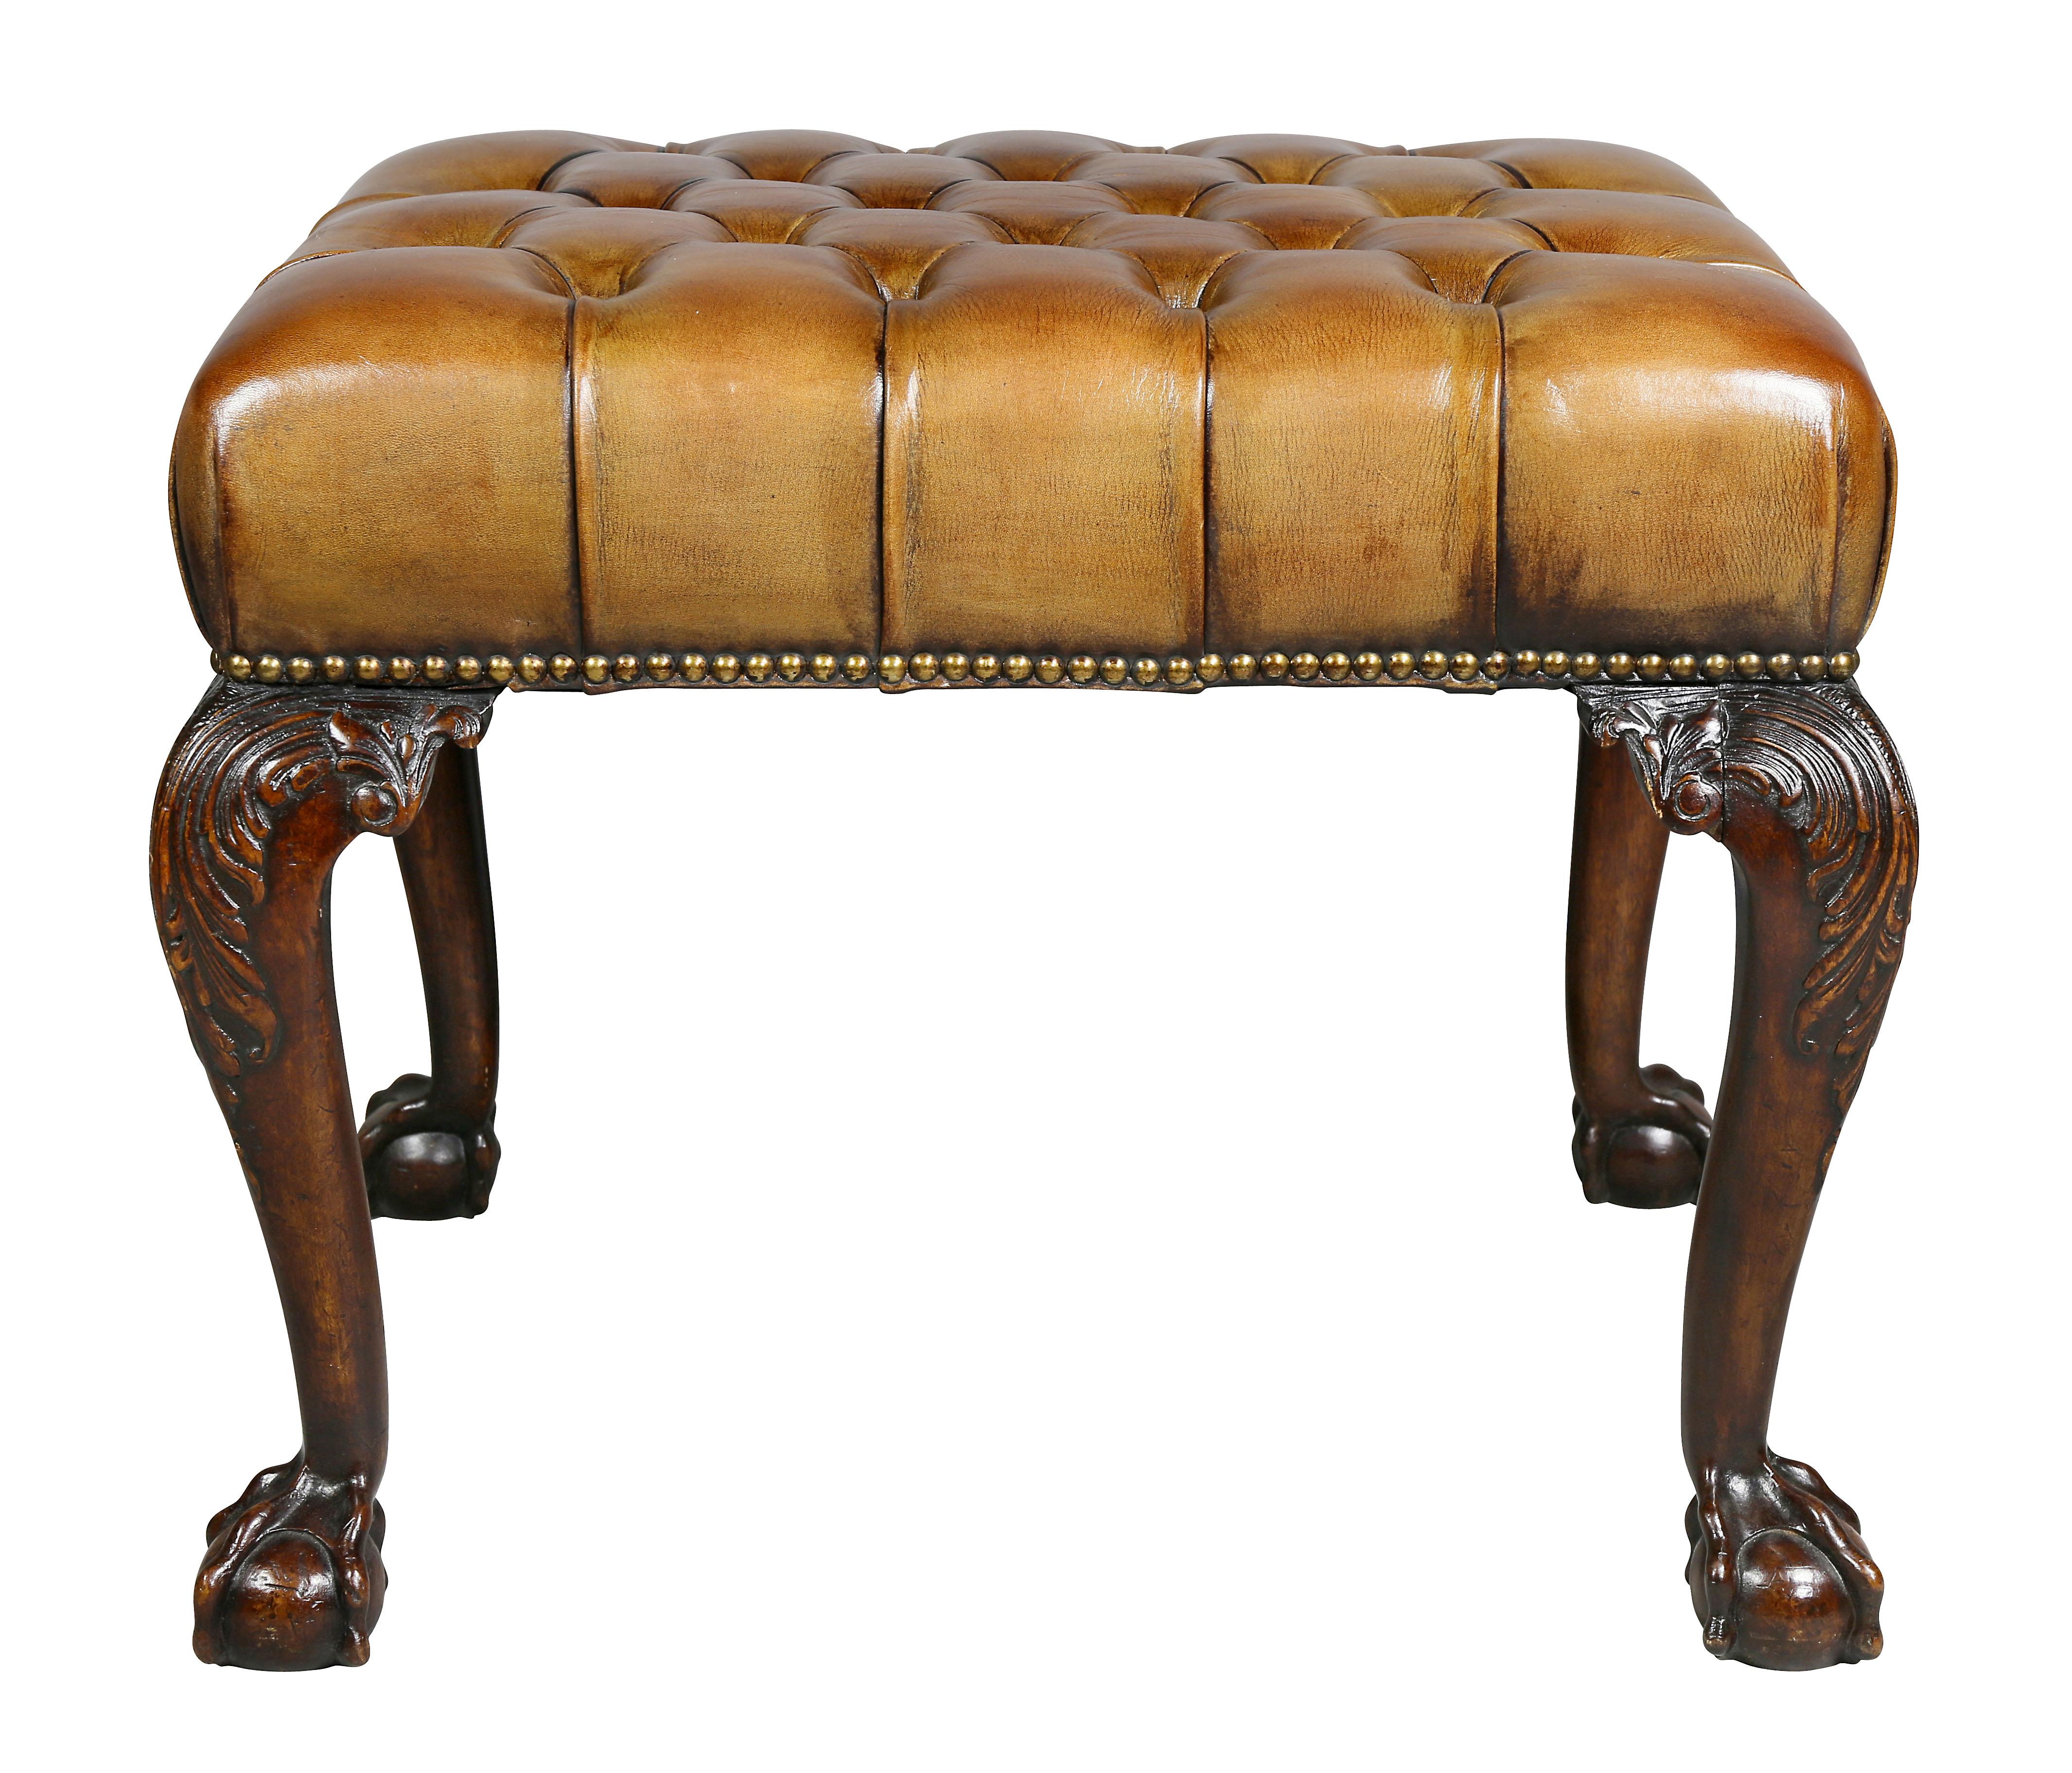 Rectangular with tufted brown leather seat, carved cabriole legs ending on ball and claw feet. Collection W. Hodgins.